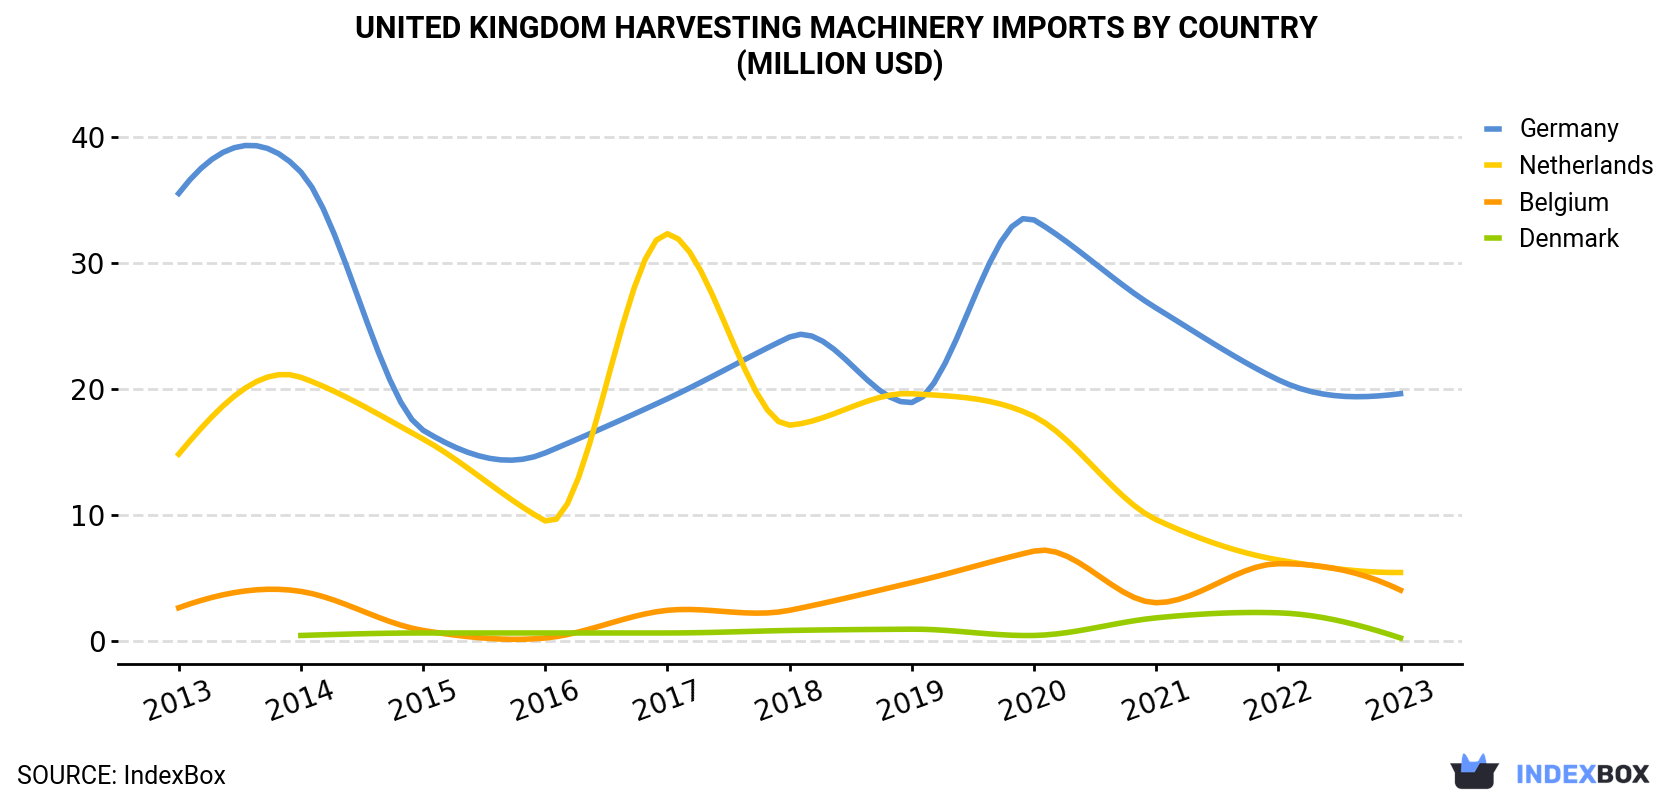 United Kingdom Harvesting Machinery Imports By Country (Million USD)